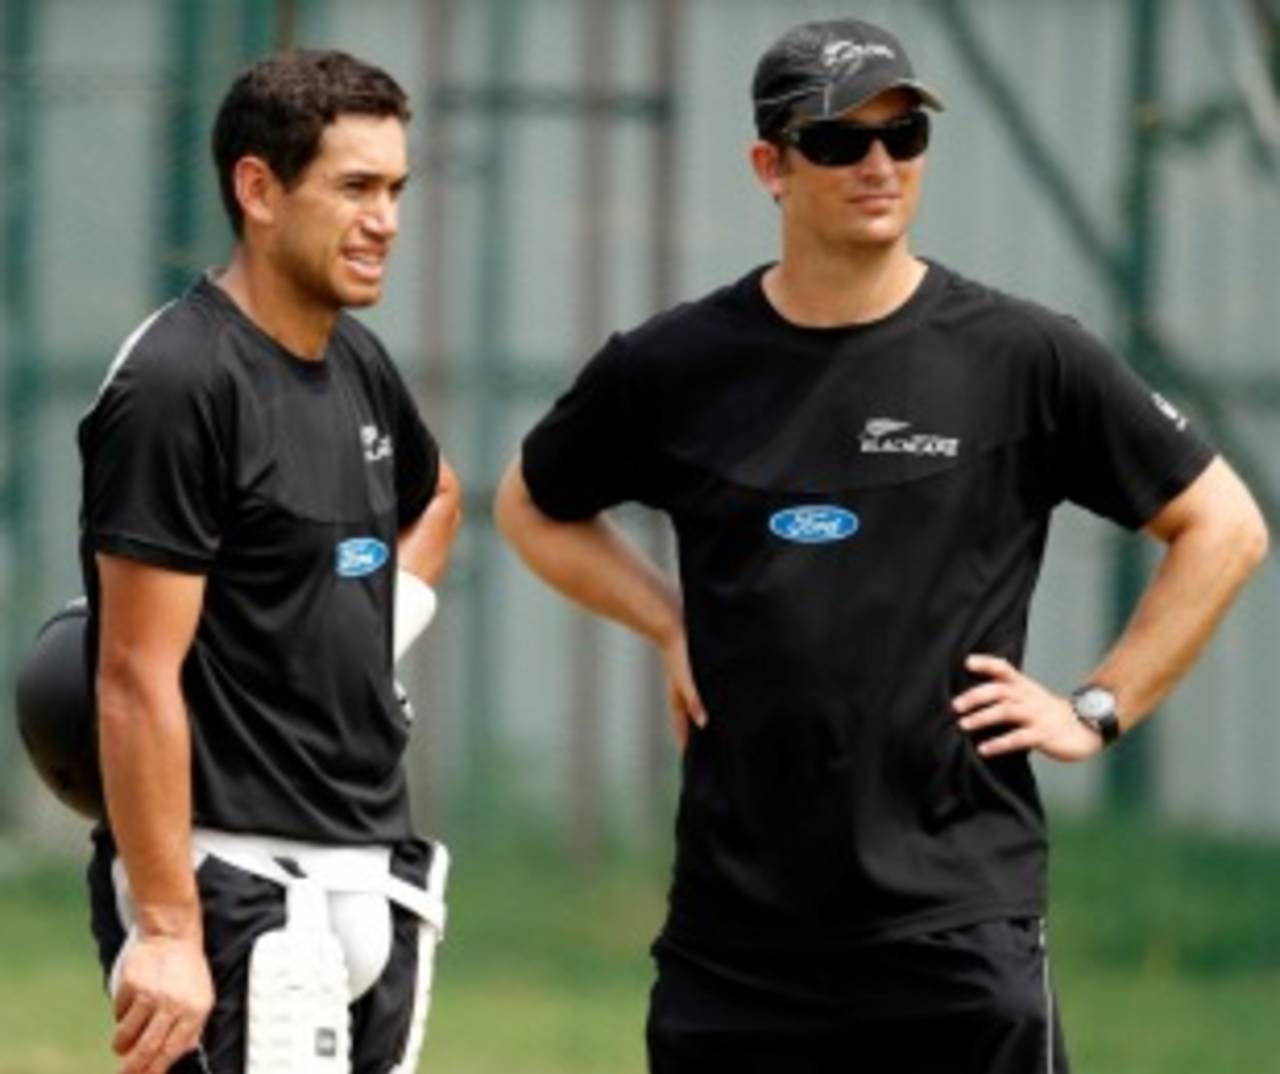 In a letter to New Zealand Cricket, Shane Bond wrote of his disappointment at the way Ross Taylor was treated during the captaincy changeover&nbsp;&nbsp;&bull;&nbsp;&nbsp;Associated Press